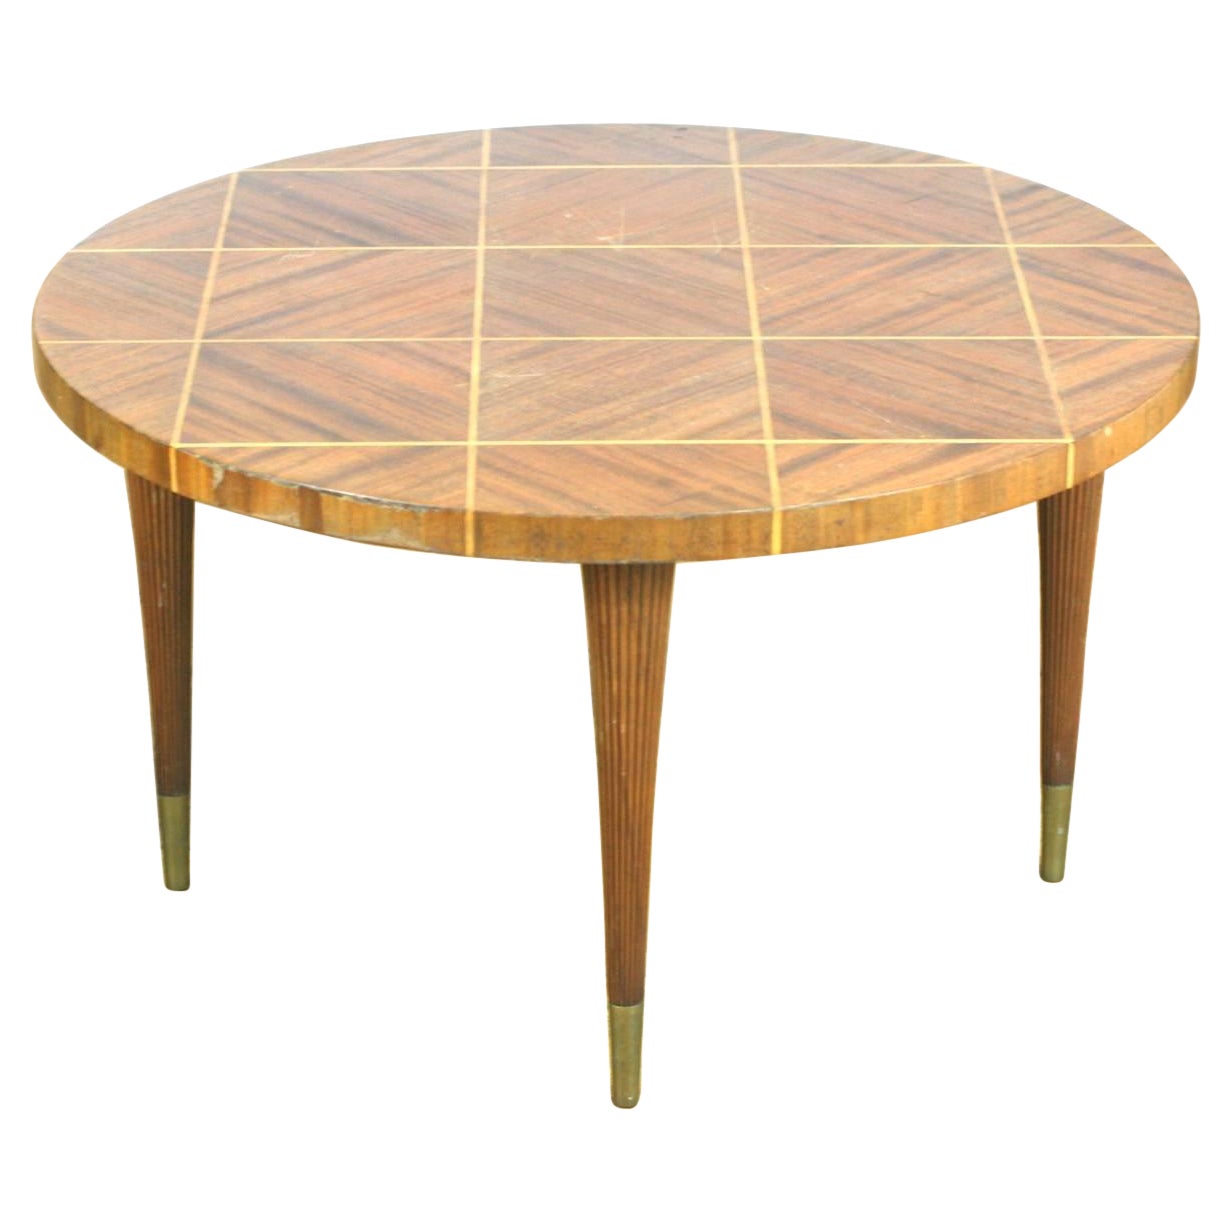 Charak Modern Inlaid Table, Tommi Parzinger